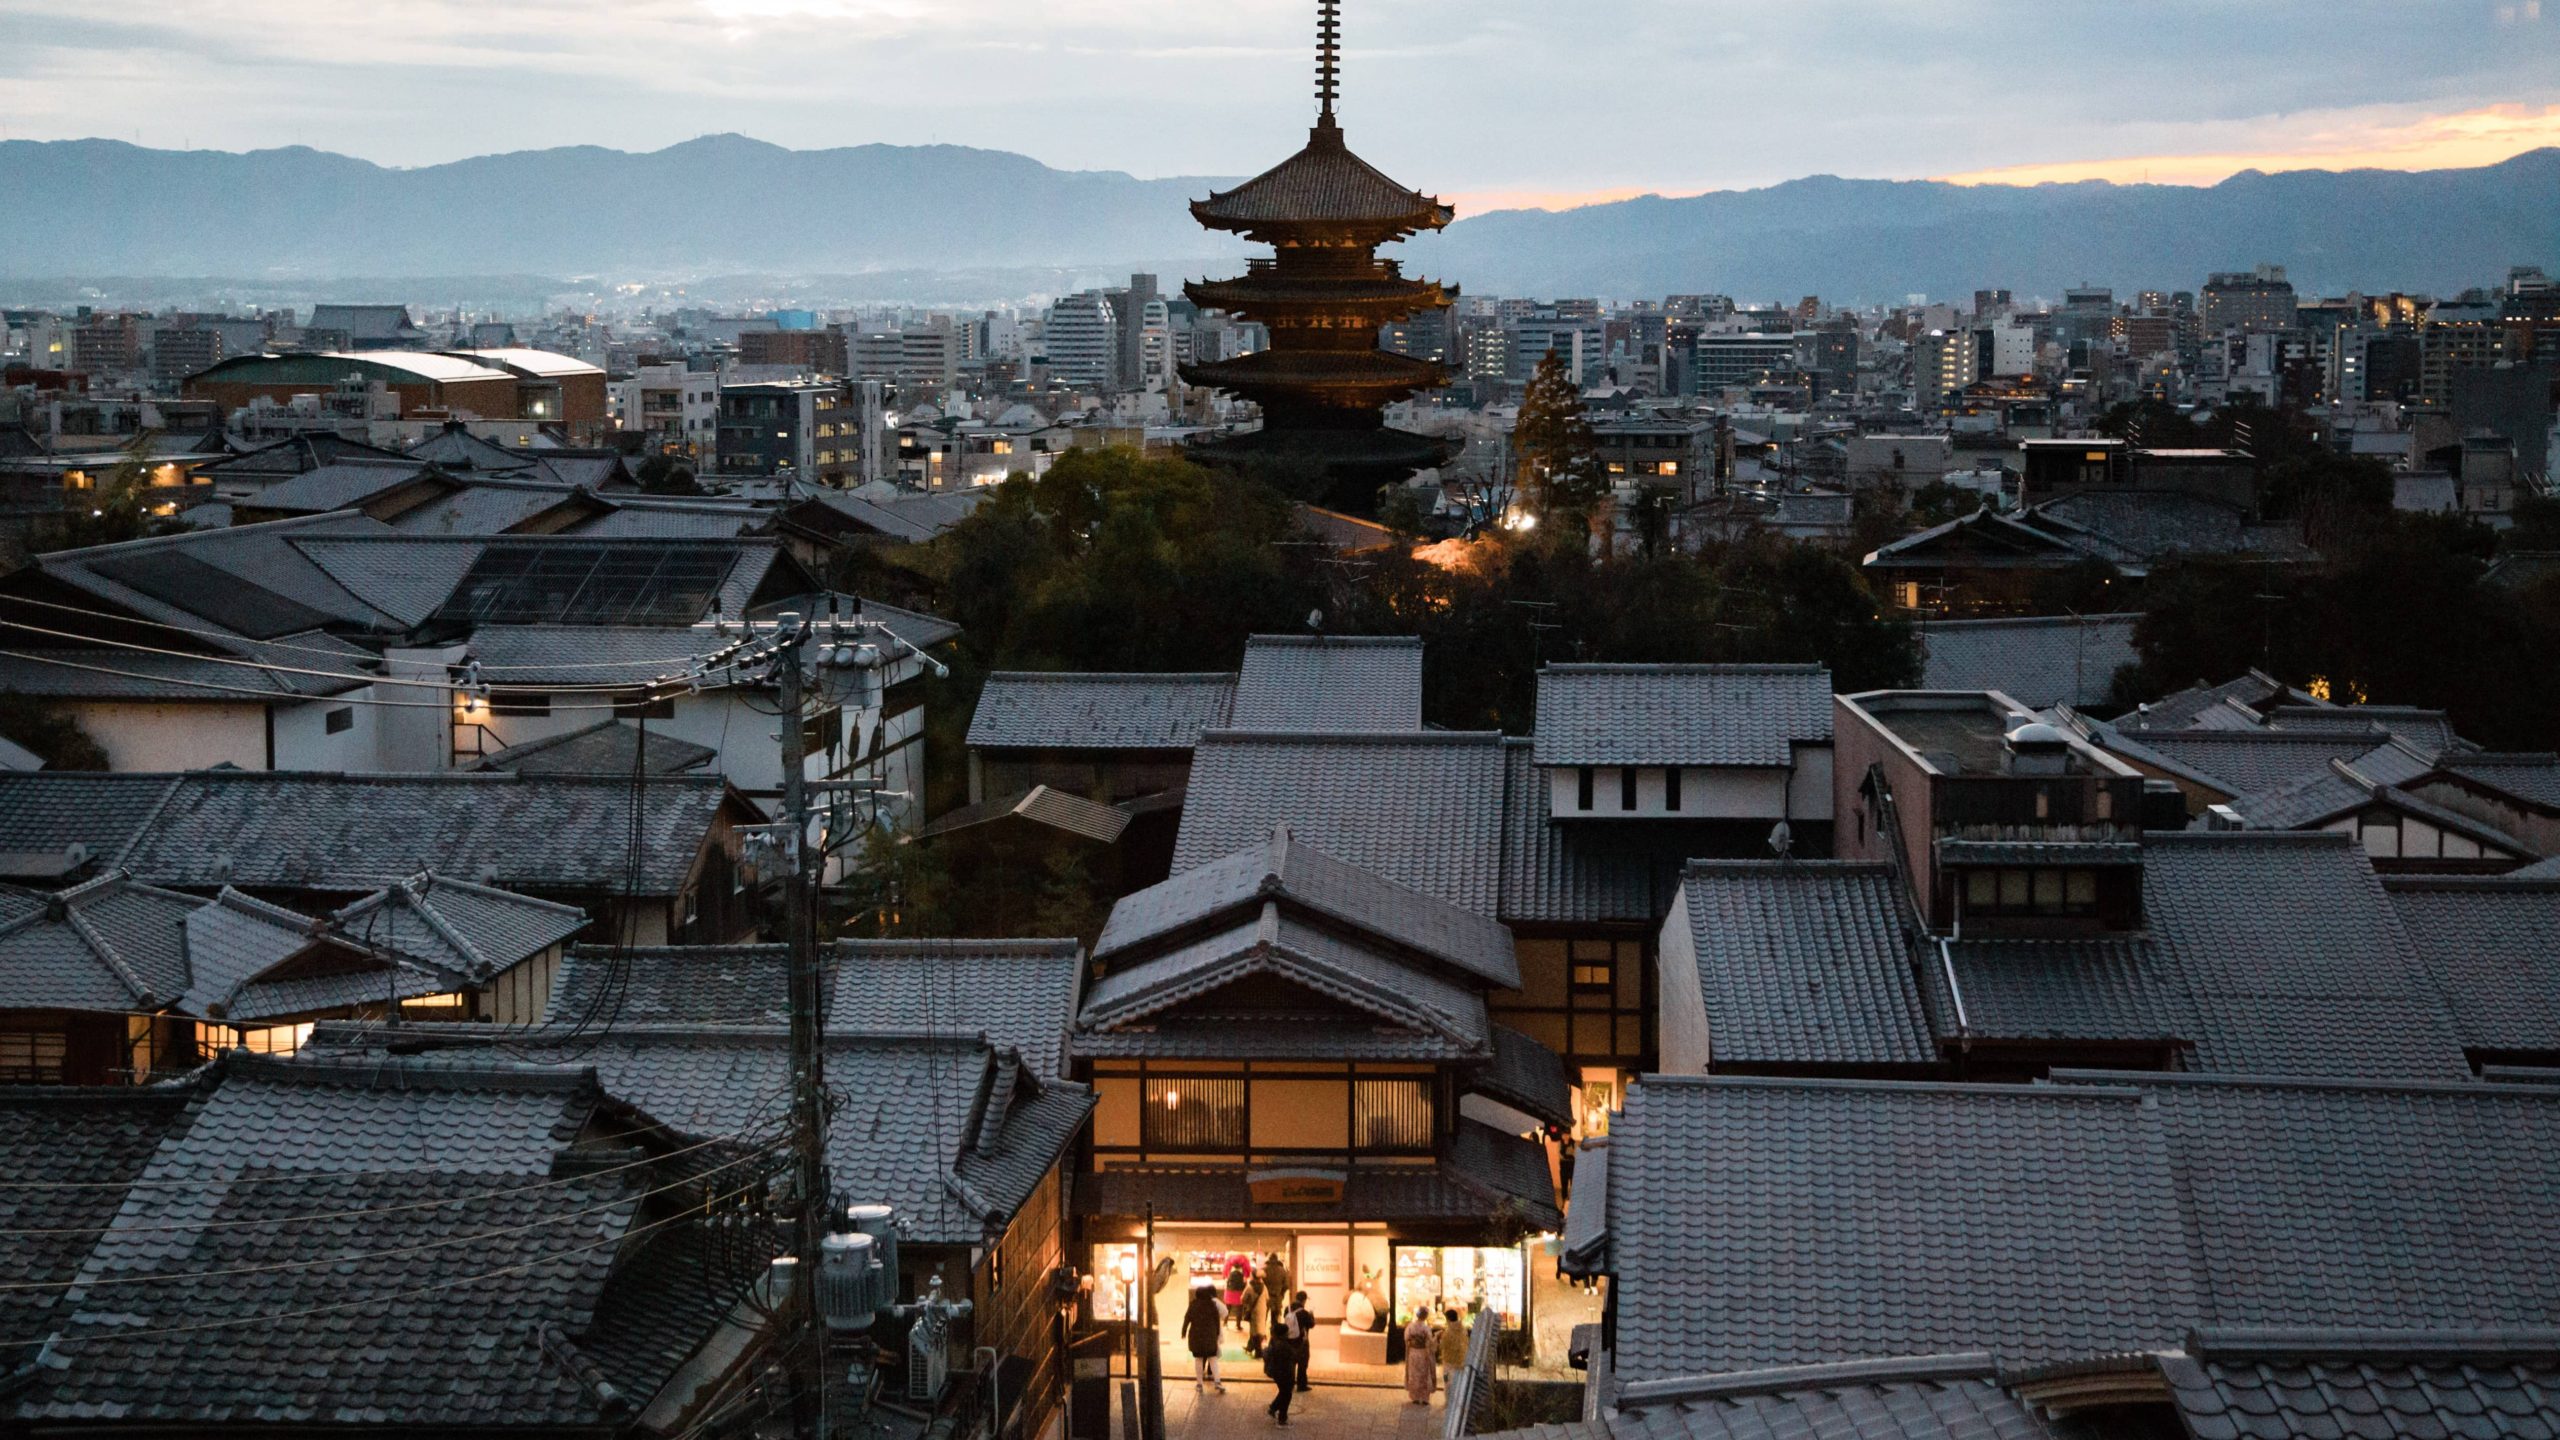 Kyoto City, traditional Japanese architecture